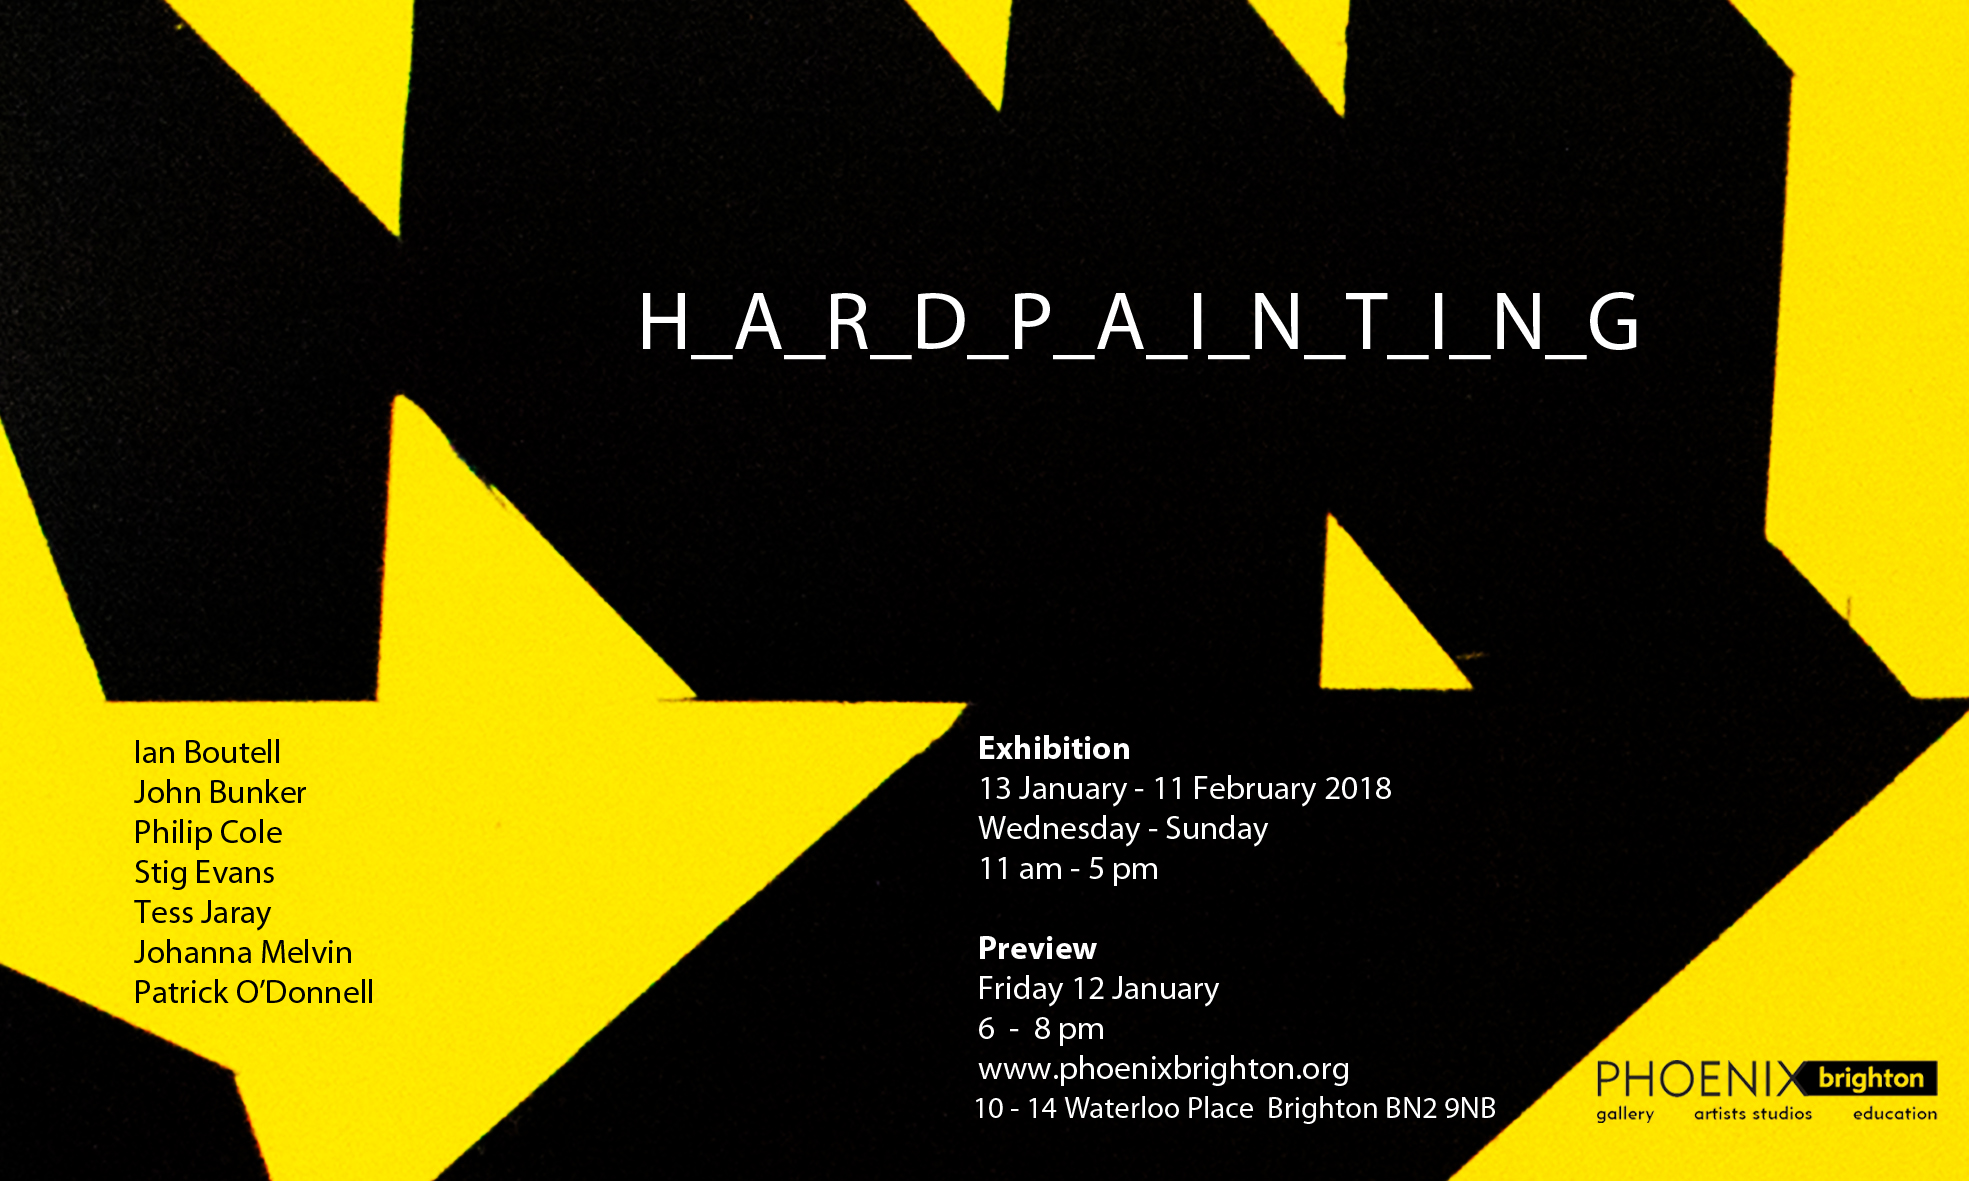 Exhibition flyer by Patrick O'Donnell (image detail from Neverending by Ian Boutell)